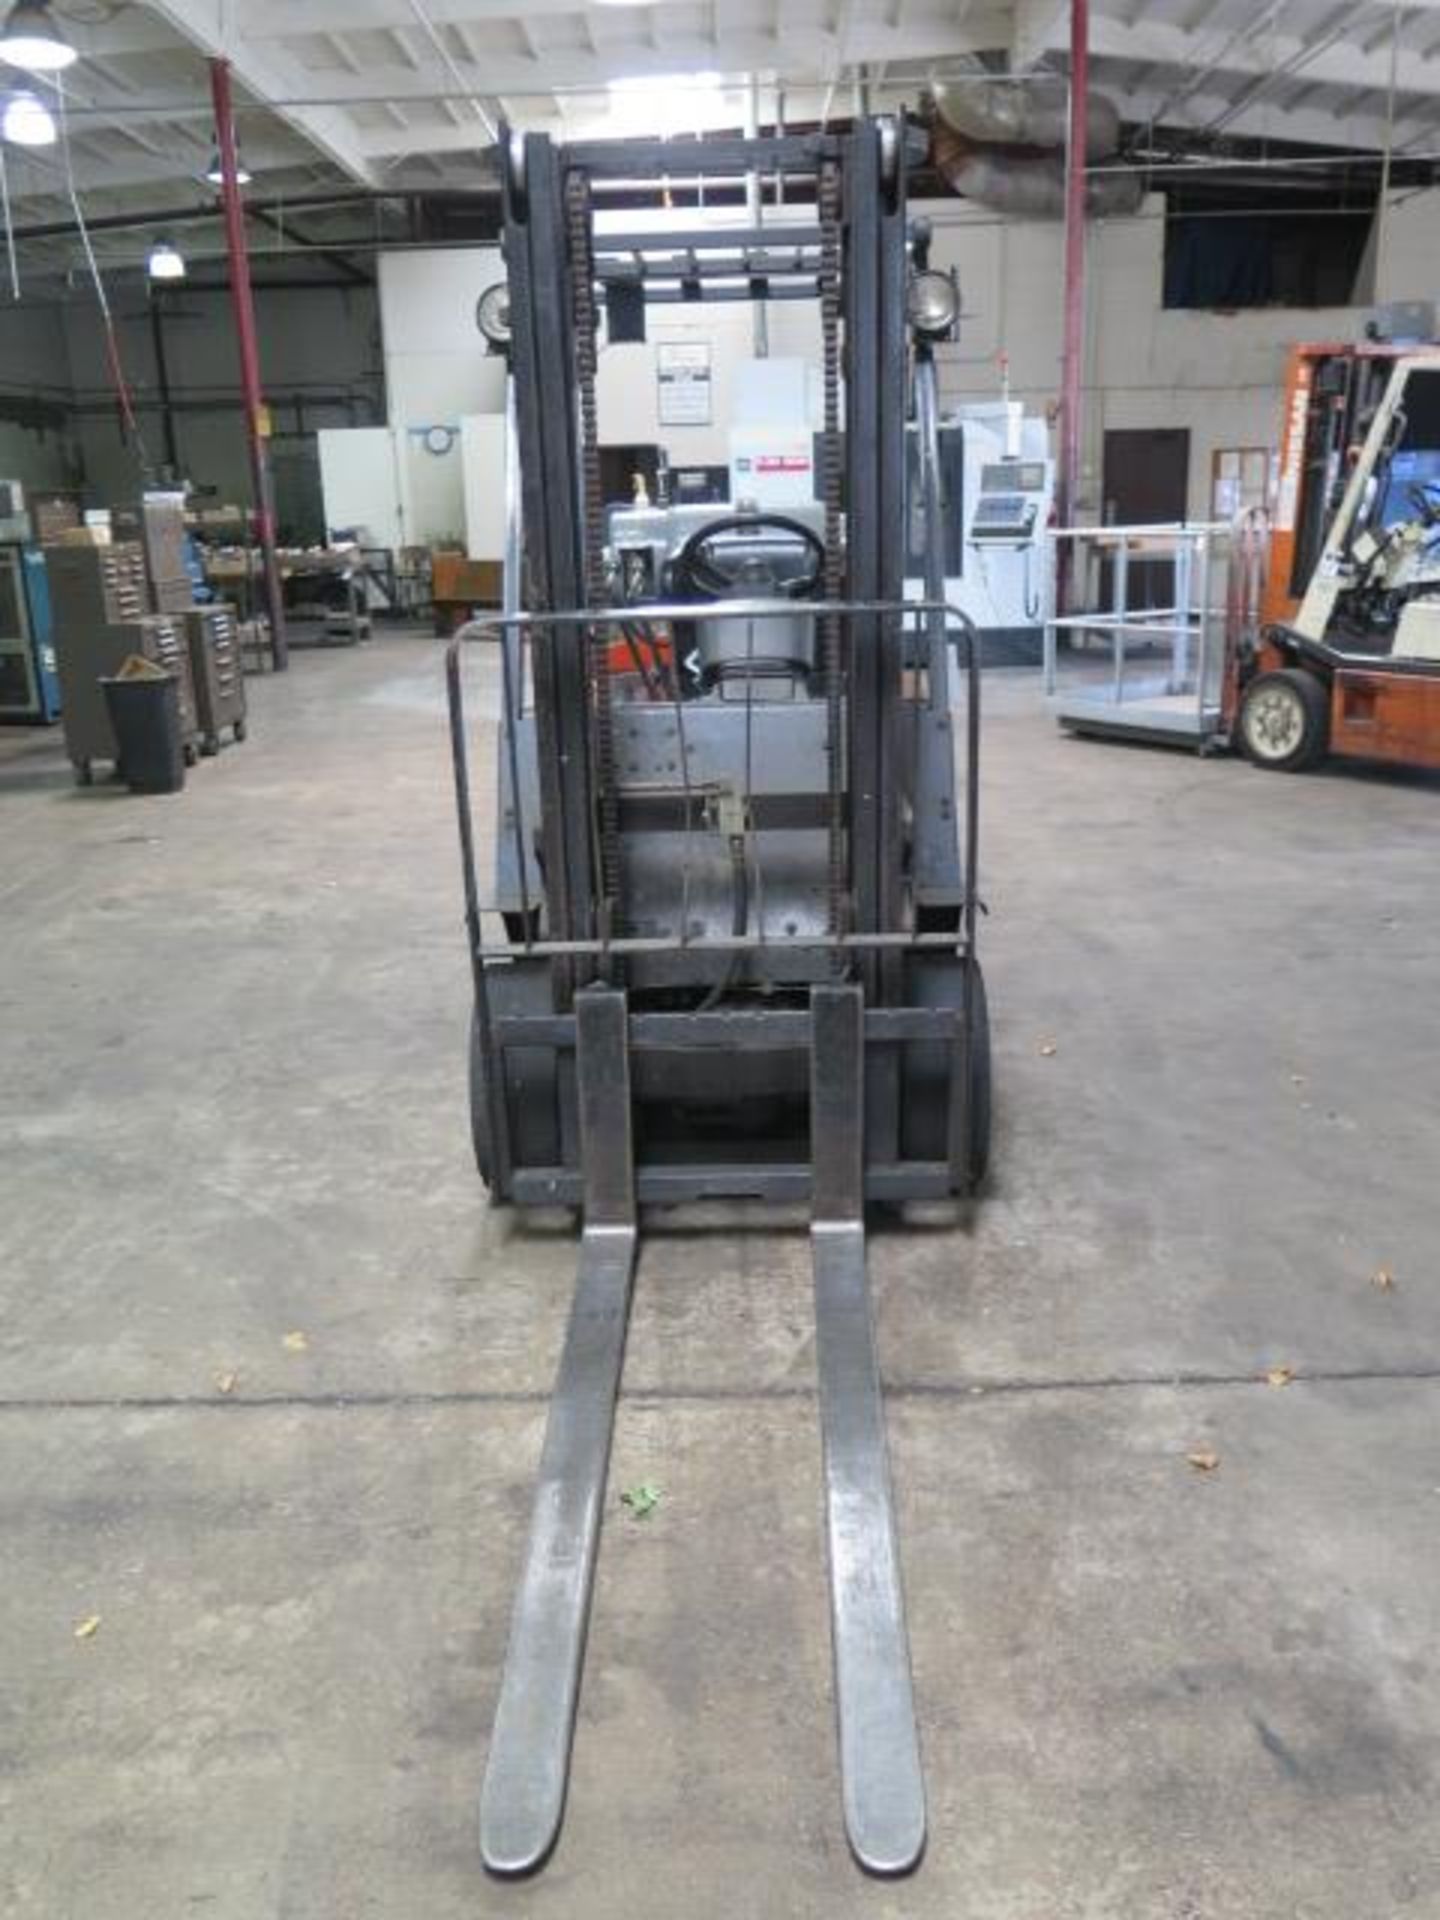 Toyota 42-6FGC20 4400 Lb Cap LPG Forklift s/n 61557 w/ 2-Stage Mast, 130” Lift Height, SOLD AS IS - Image 3 of 13